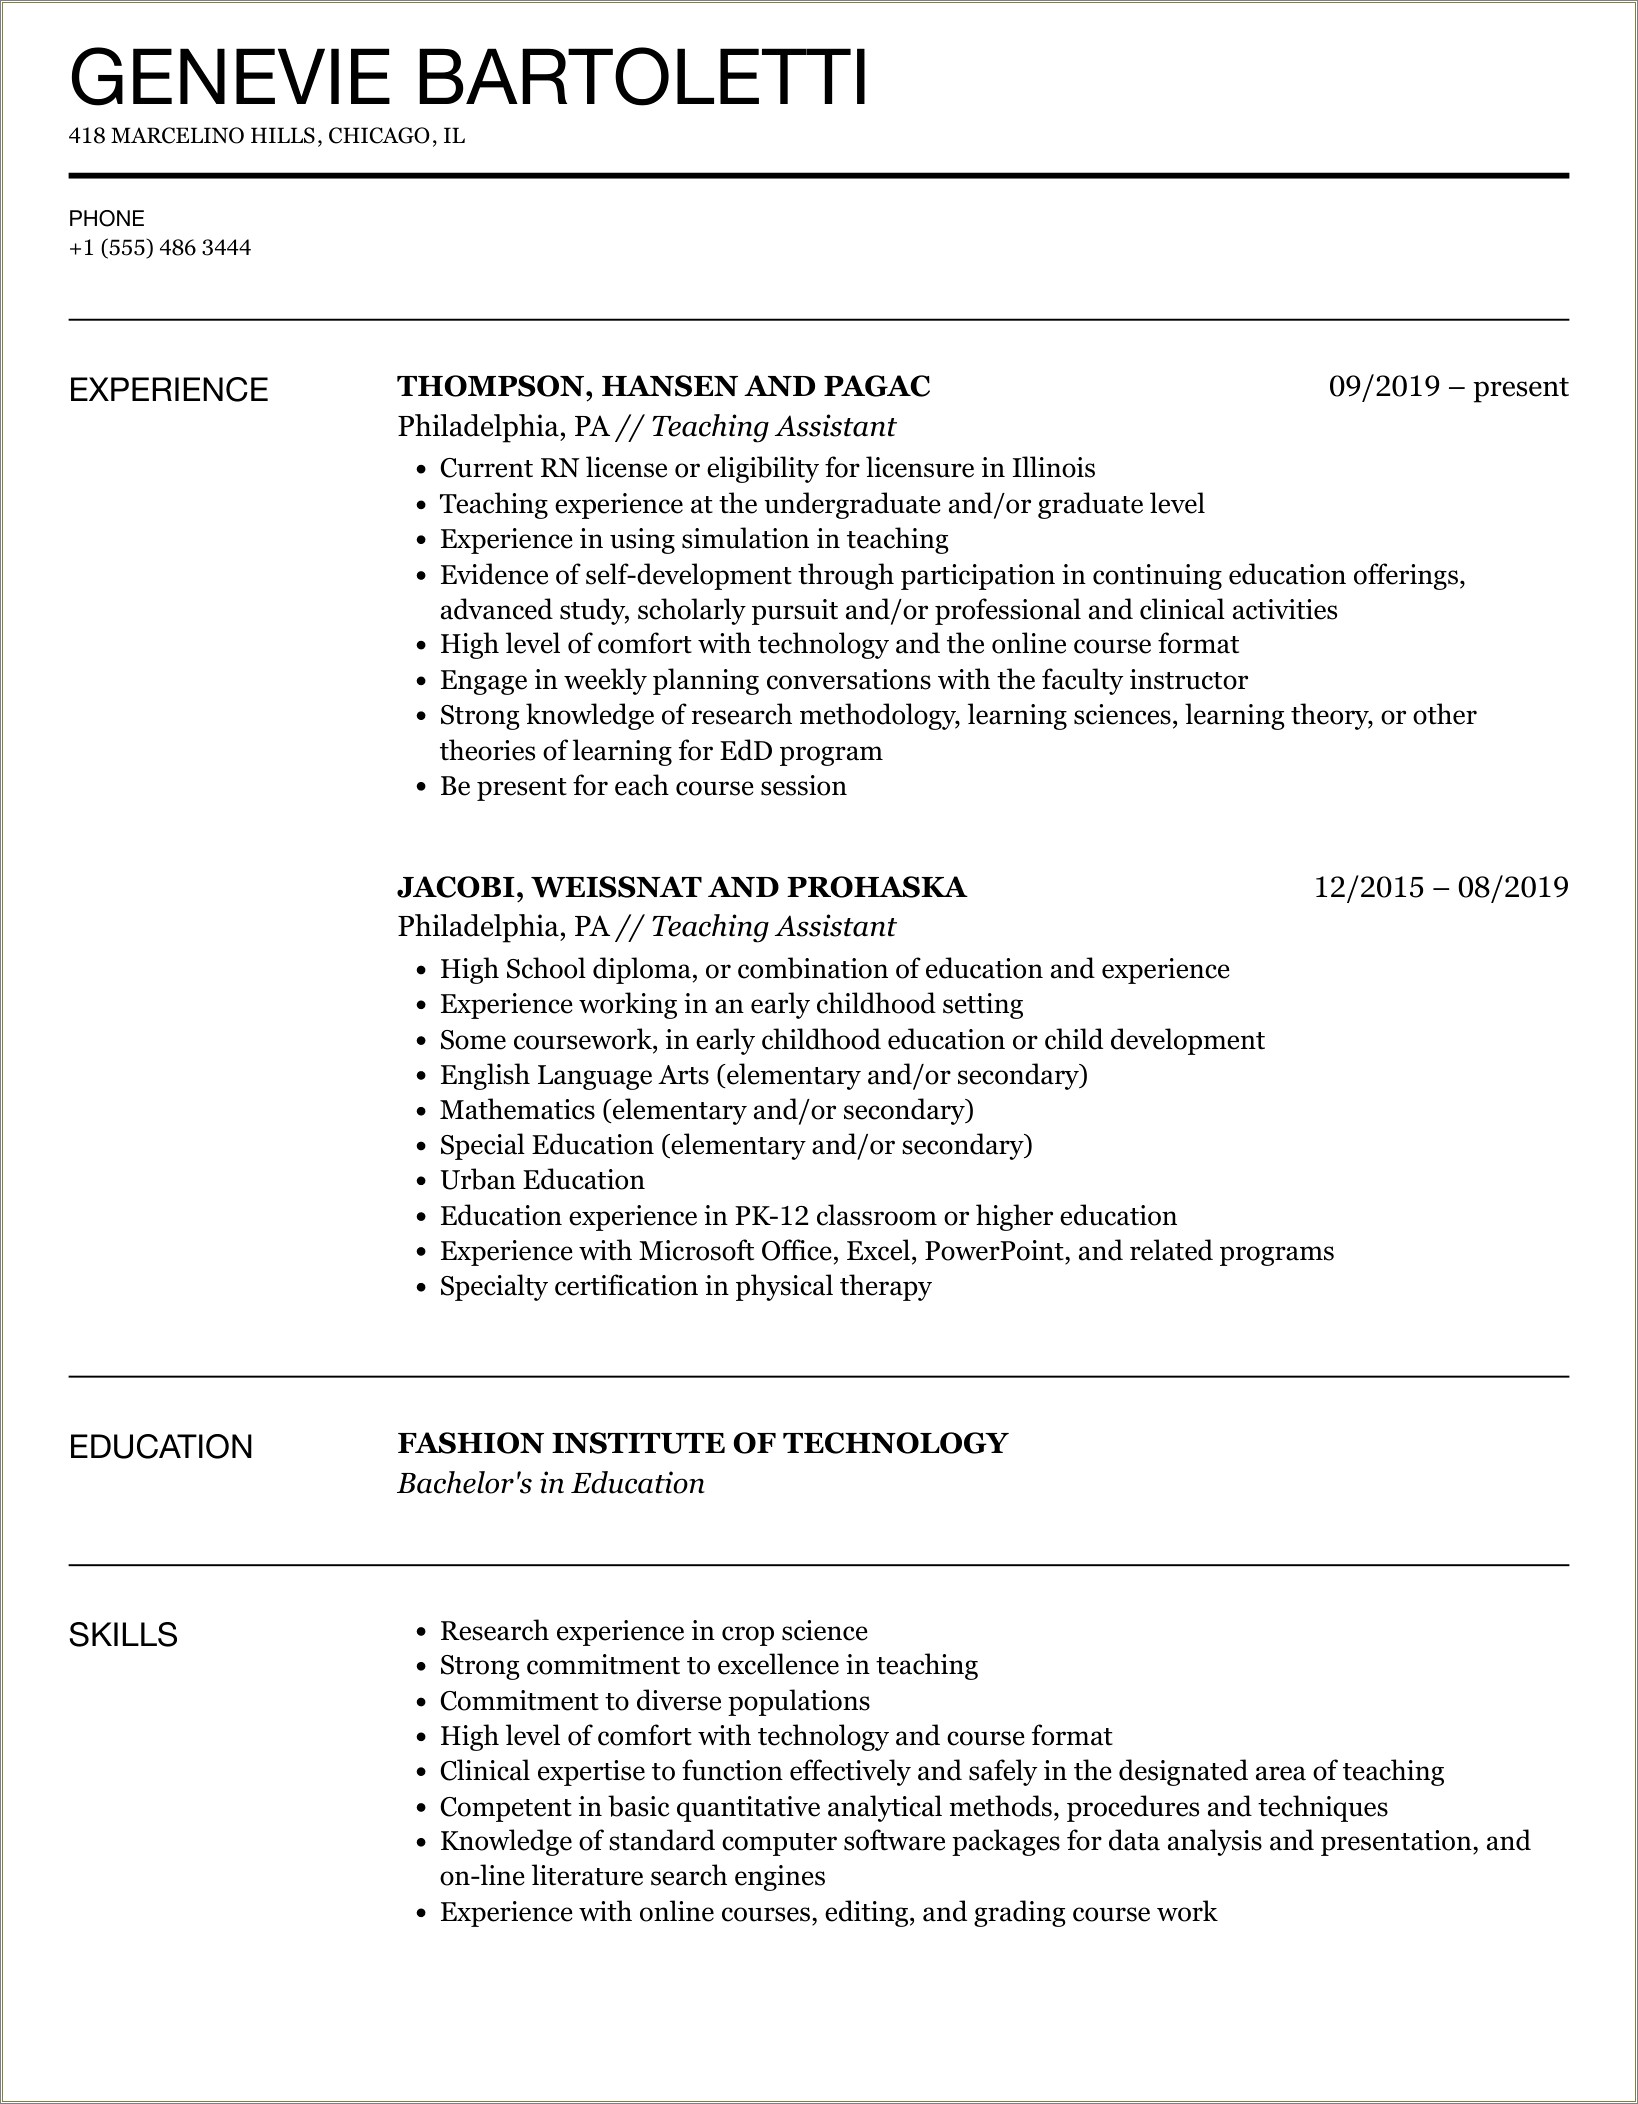 Calculus 1 In Skill Section Of Resume